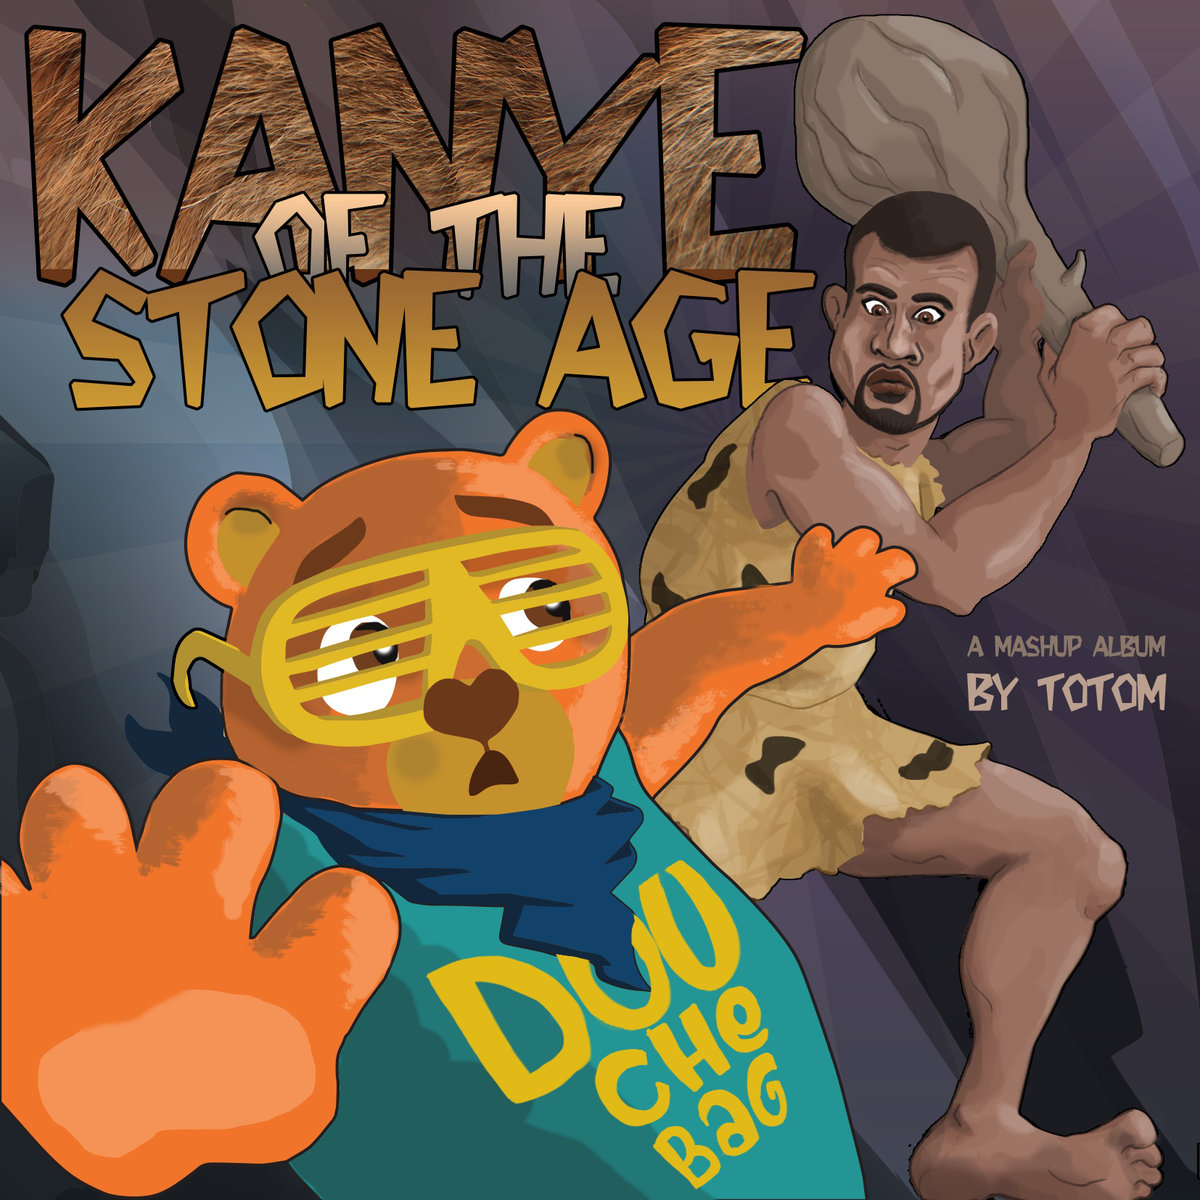 a2234887061 10 - Radio Clash Podcast Kanye of the Stone Age Radio Clash Music Mashup Podcast brings you the best in eclectic tunes, mashups and remixes from around the world. Since 2004, we've been bringing you the freshest and most innovative music from a diverse range of genres and cultures. Join us on our musical journey as we explore the sounds of yesterday, today, and tomorrow. Discover new music and be inspired by the mashup of musical styles that only Radio Clash can provide. Subscribe now to elevate your musical experience!